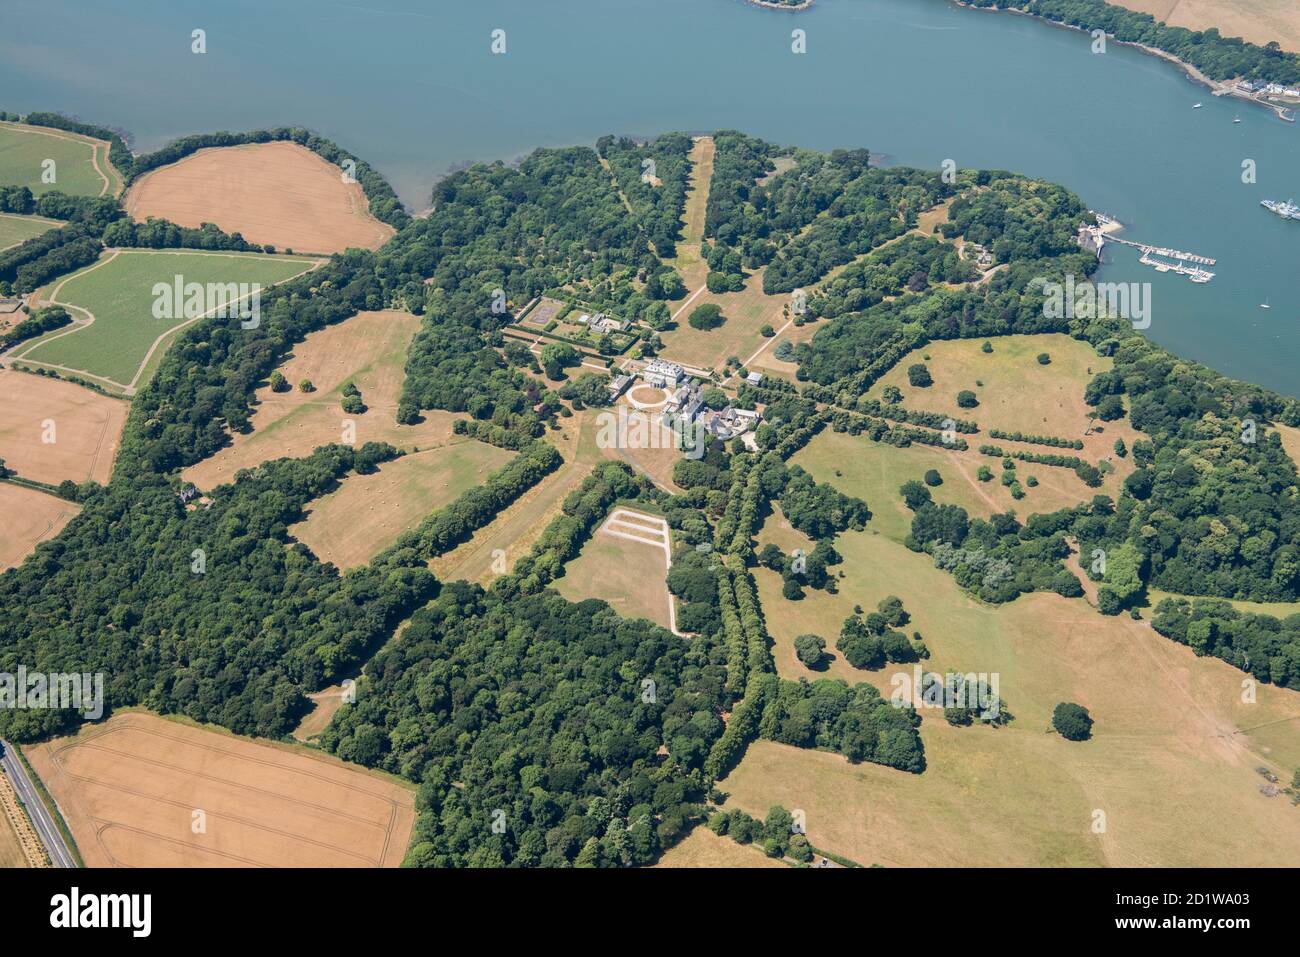 Antony Park, Cornwall. Landscape park and gardens designed by Humphry Repton at Antony Park, near Torpoint, Cornwall. Aerial view. Stock Photo